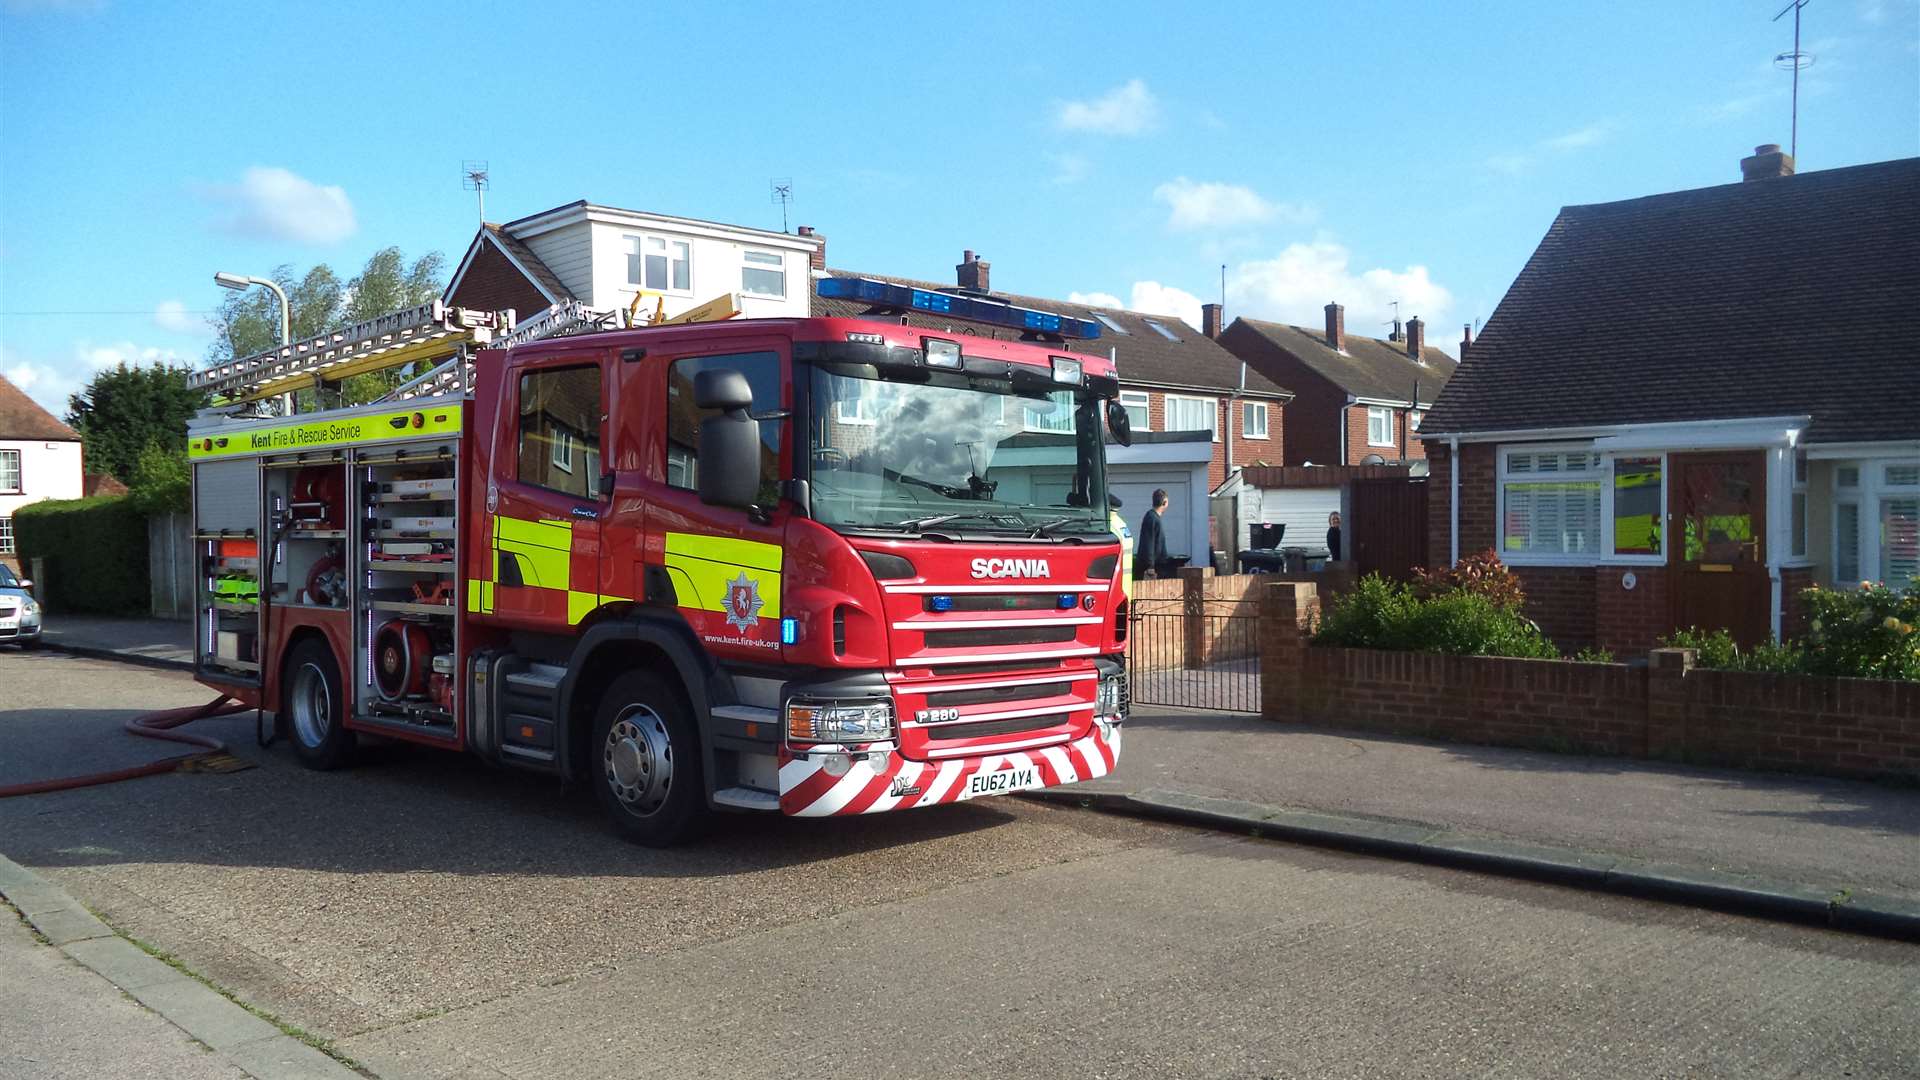 A fire engine parked in Blackburn Road in Greenhill